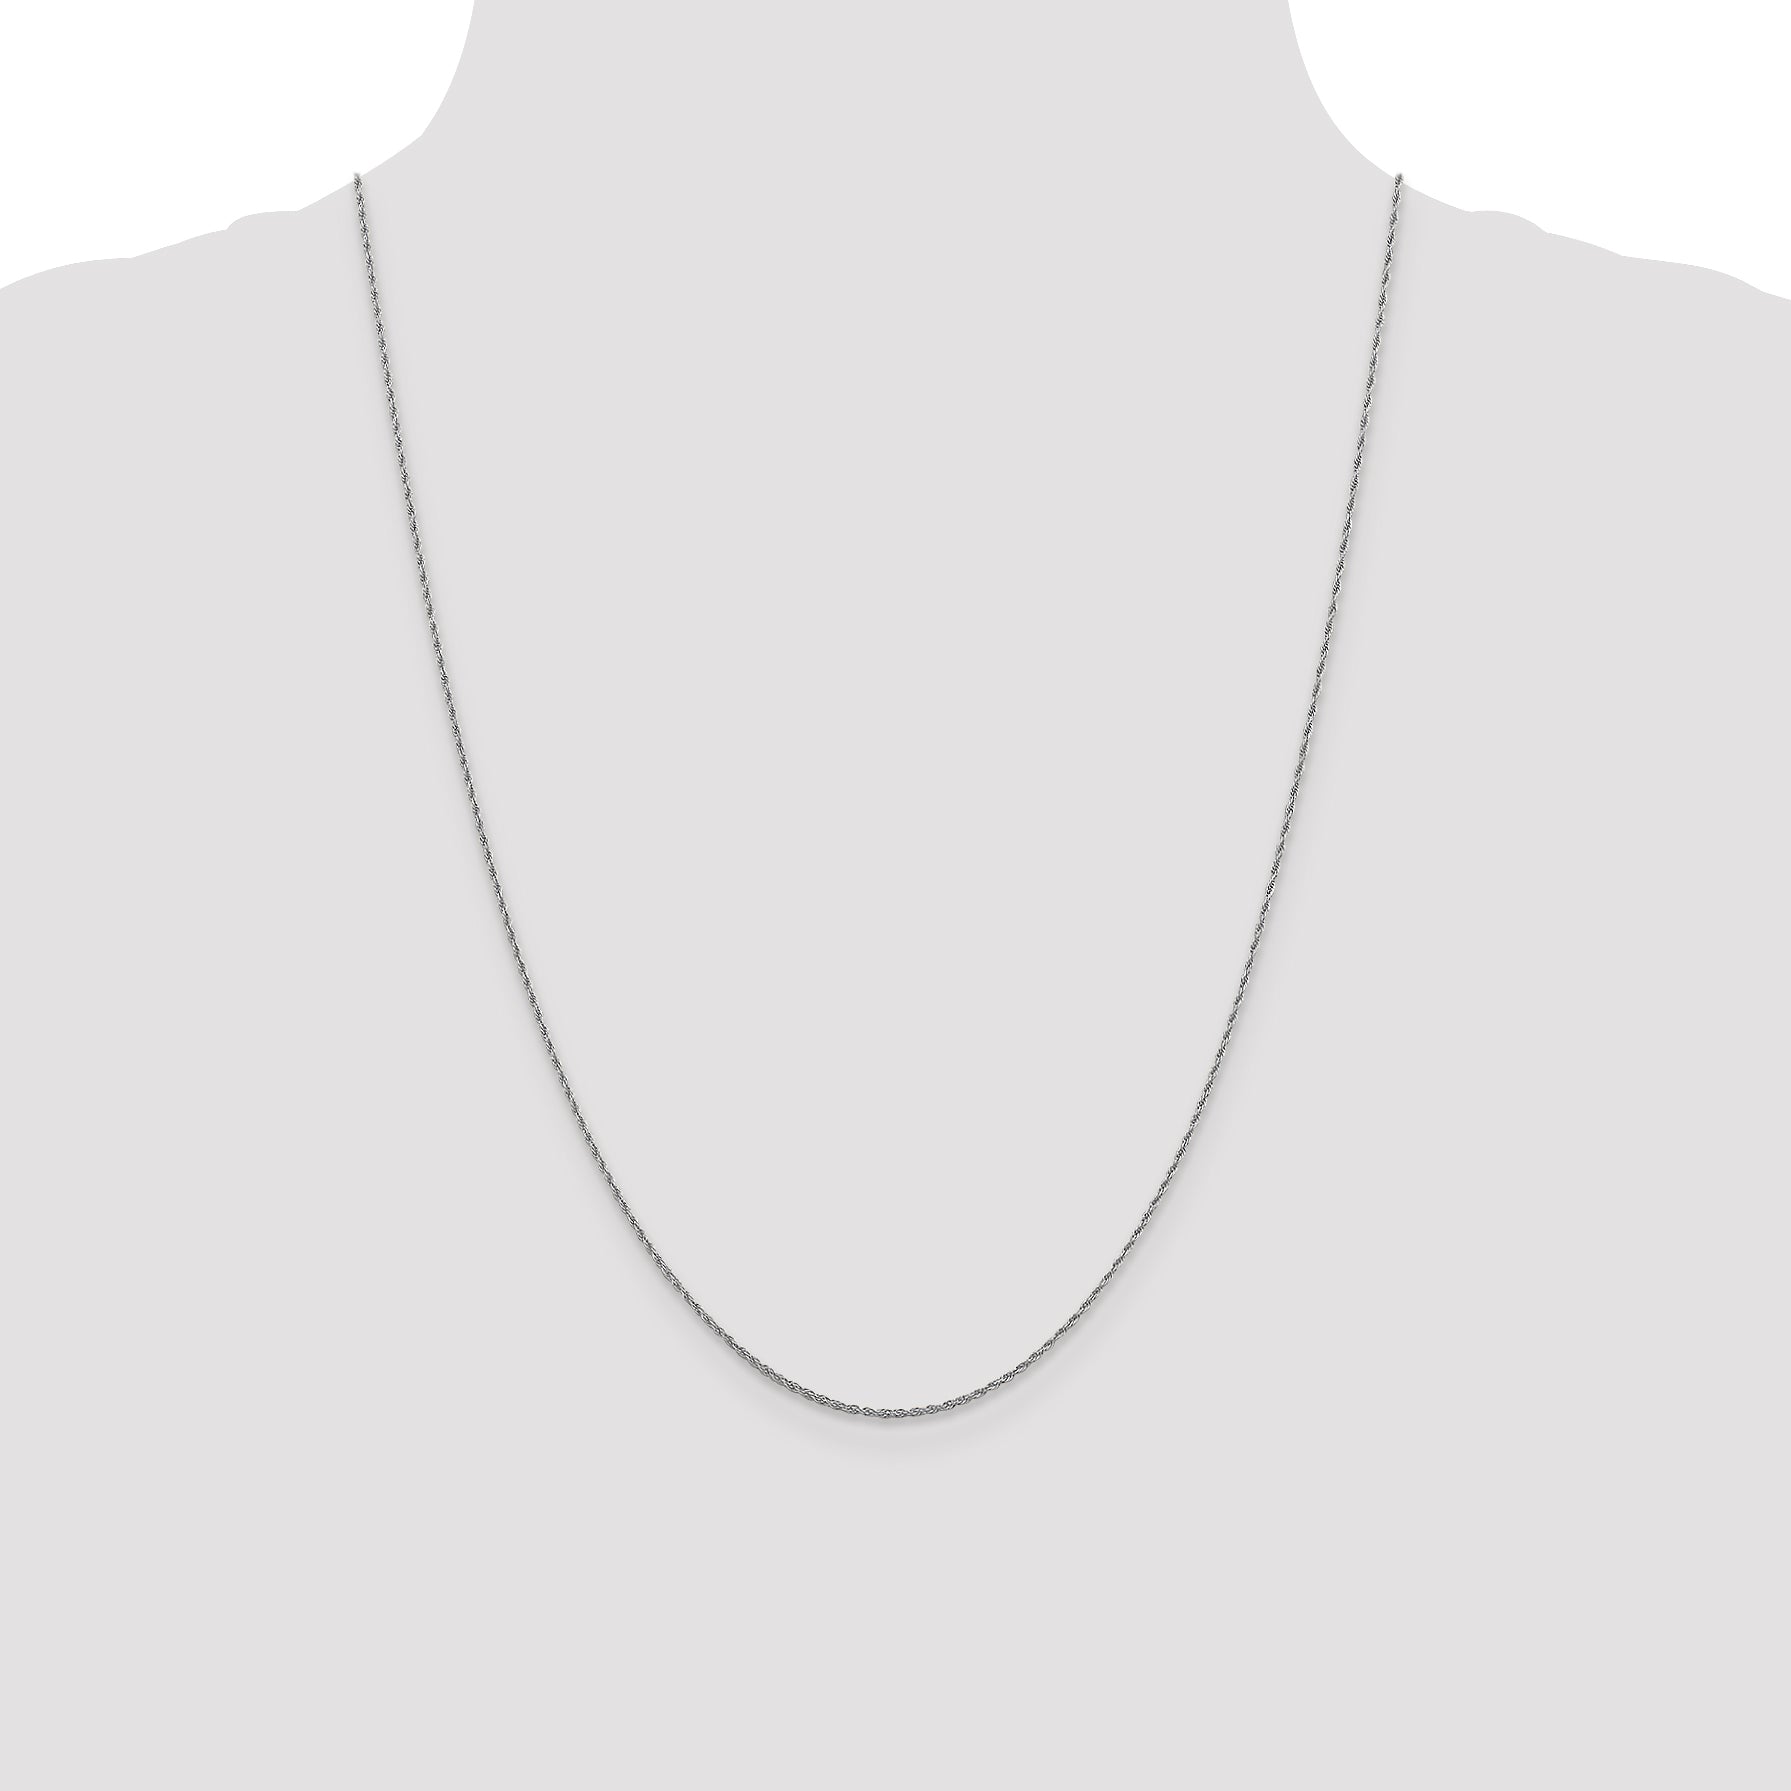 10K White Gold 1.2 mm Loose Rope Chain